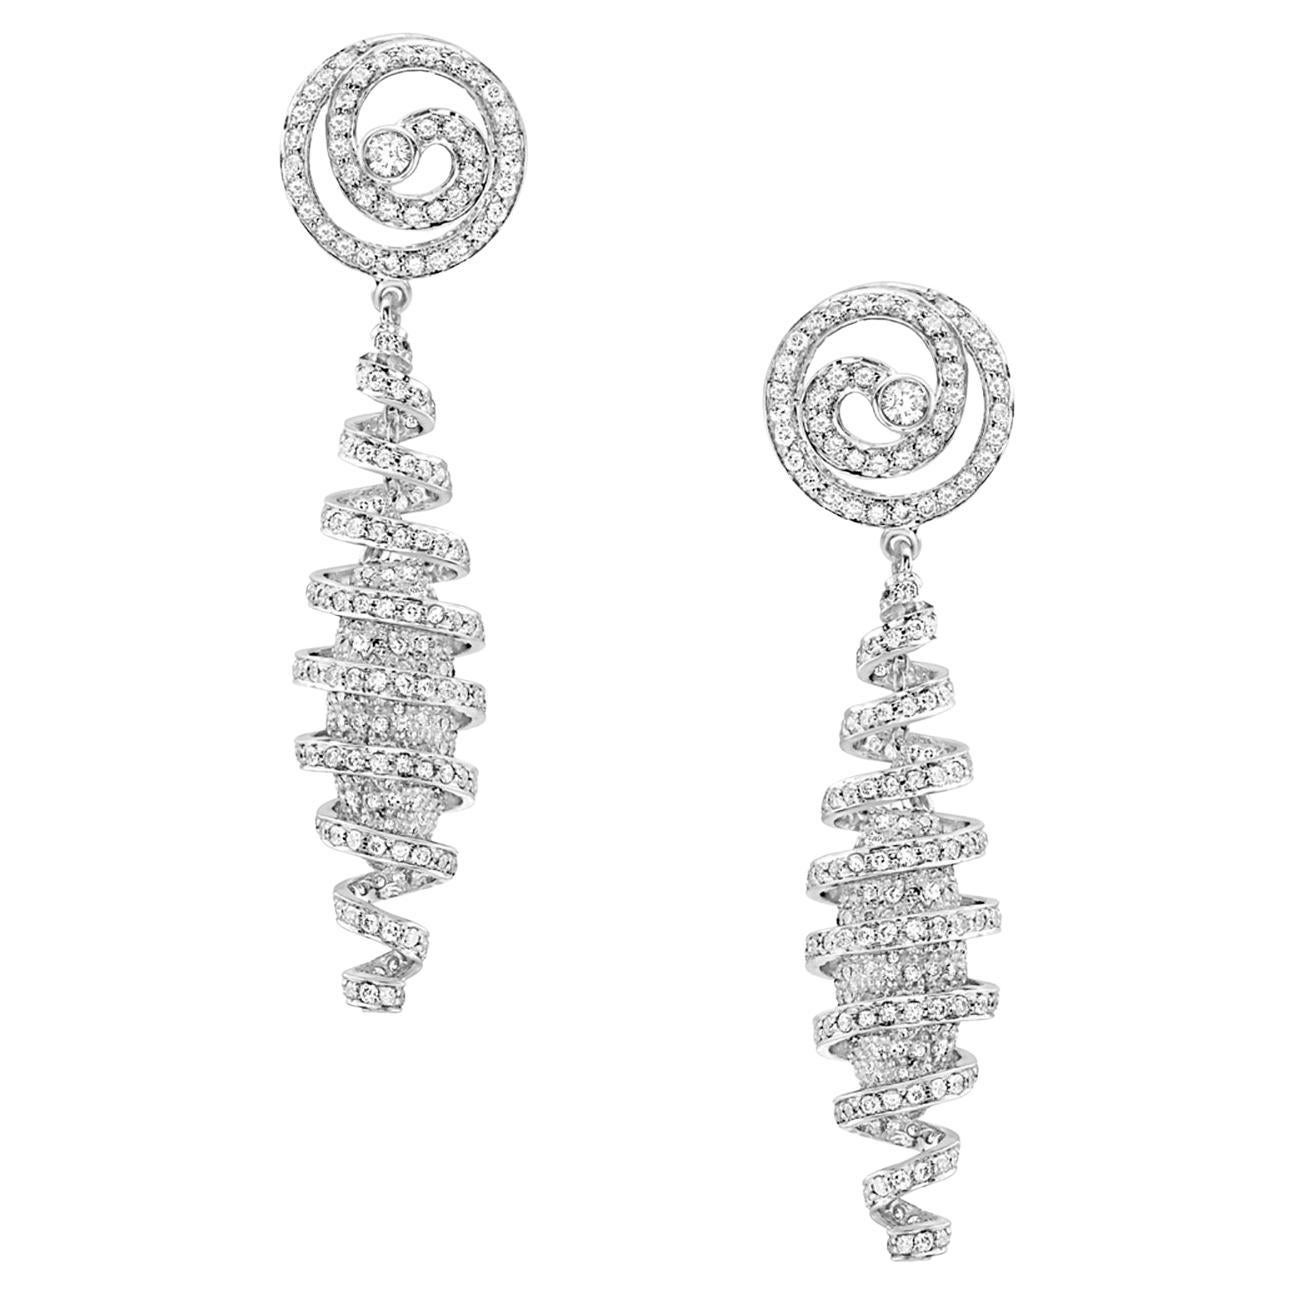 Spiral Shaped Earrings with Pave Halo Diamonds Made in 18k White Gold For Sale